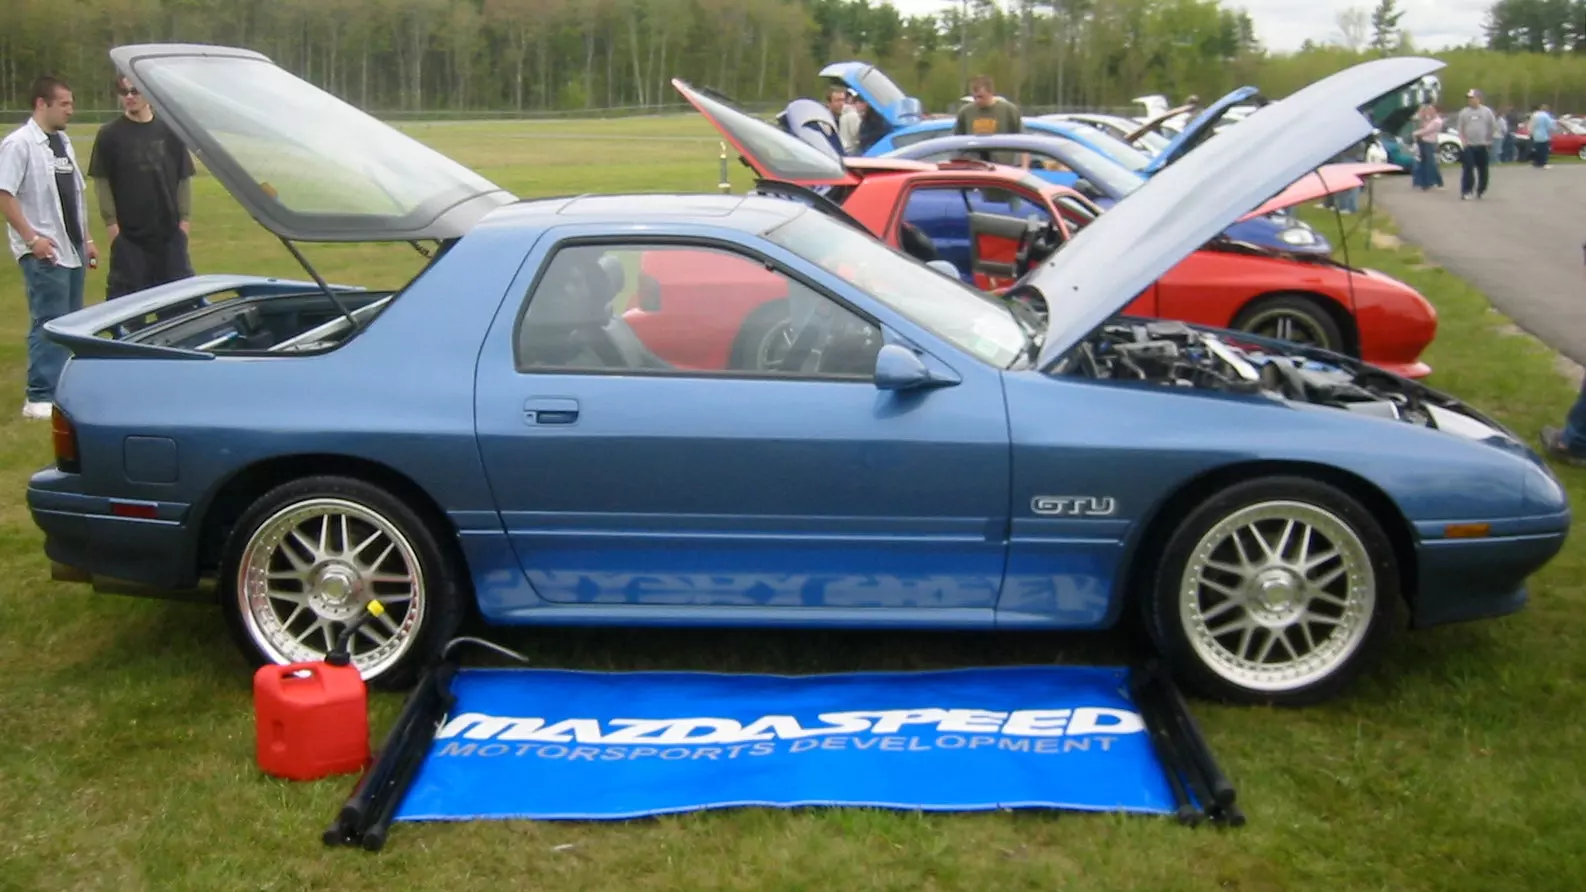 I Sure Was Proud of My Car Show Display in 2005